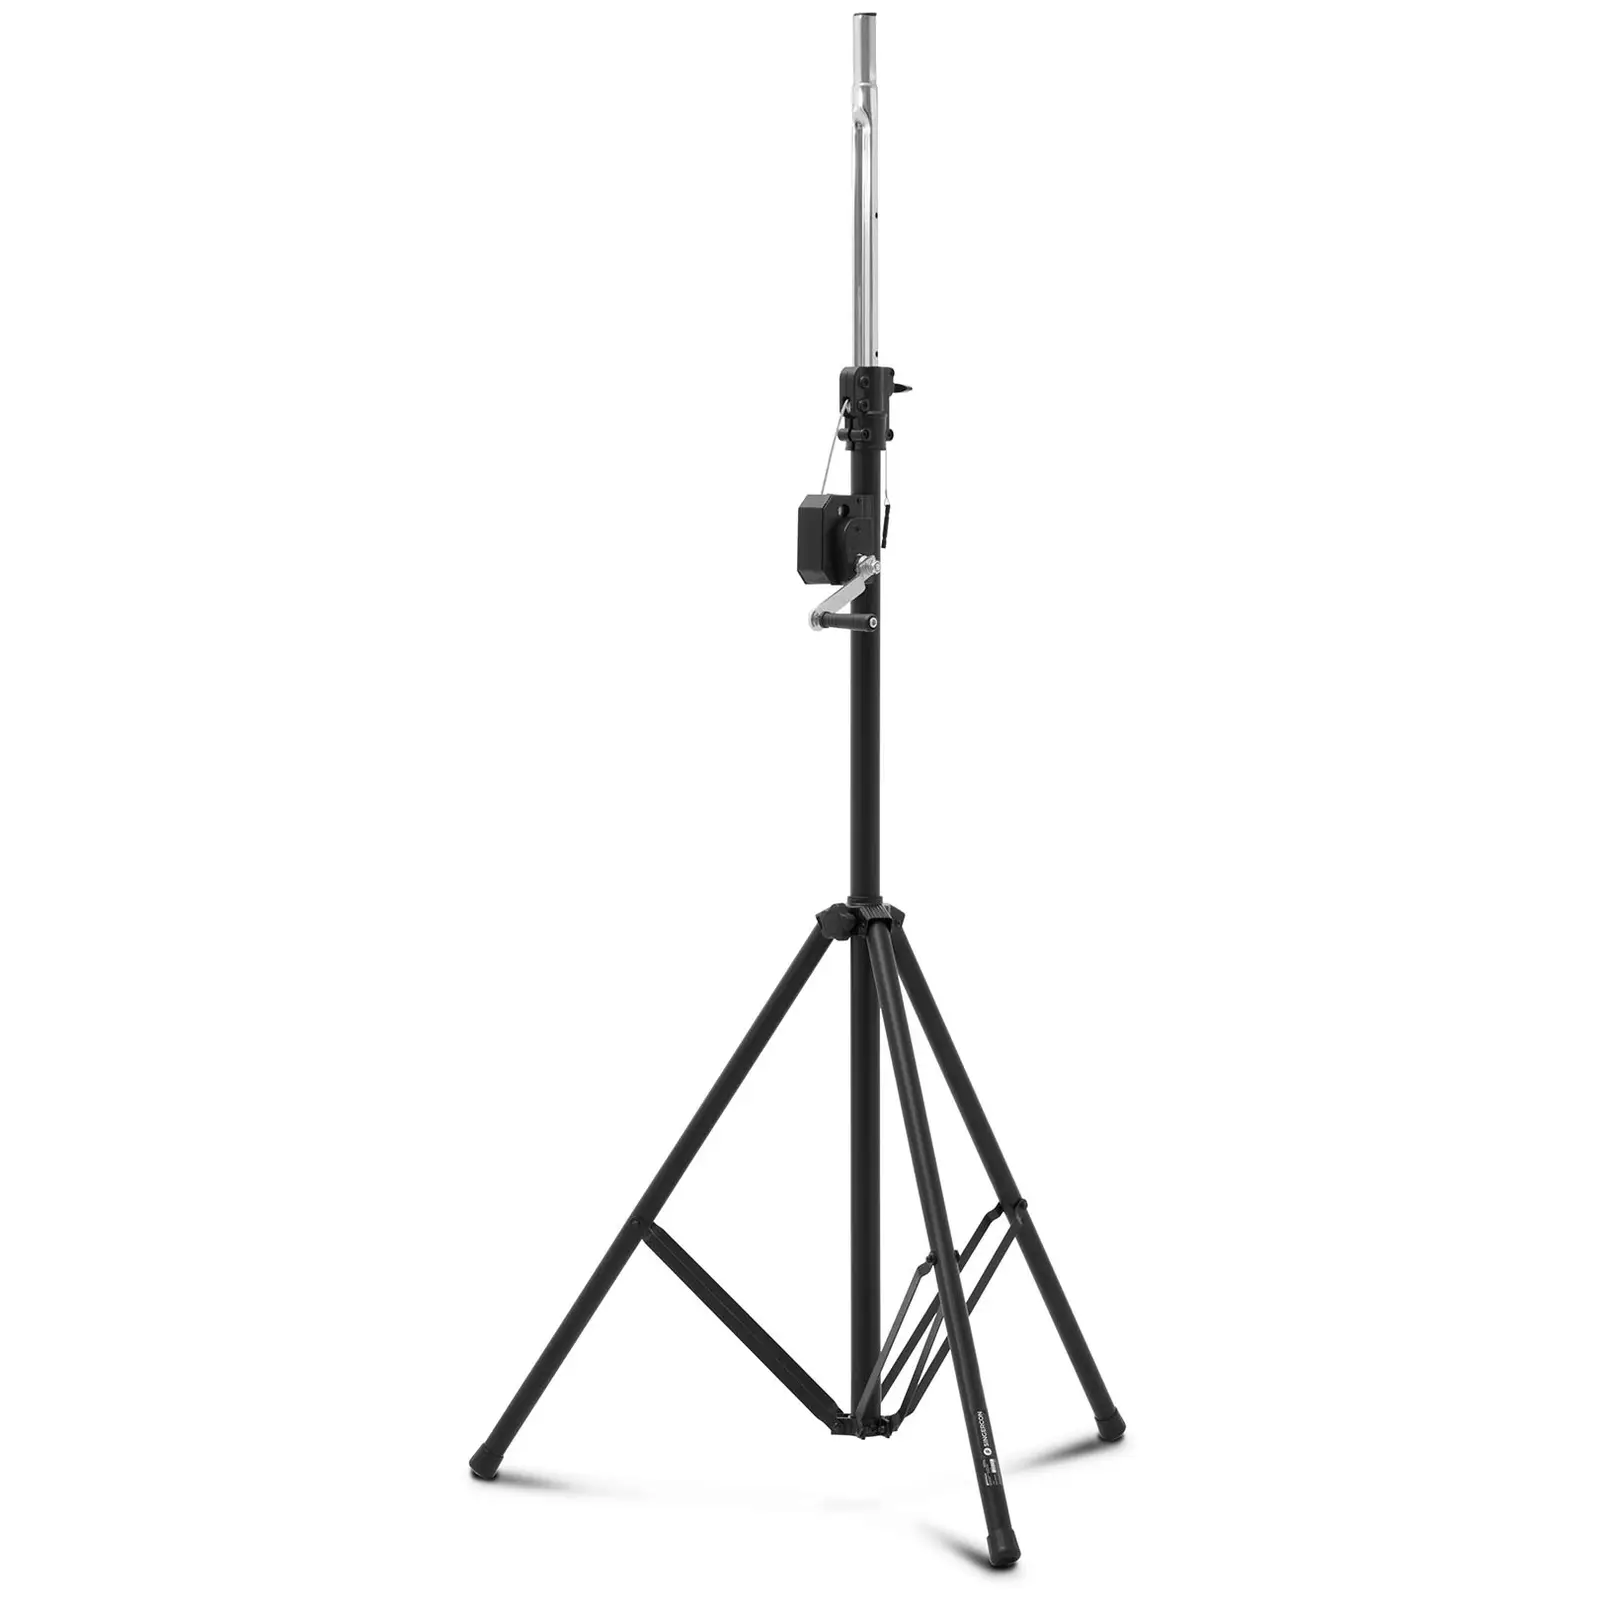 Light stand - up to 70 kg - 1.4 - 3 m